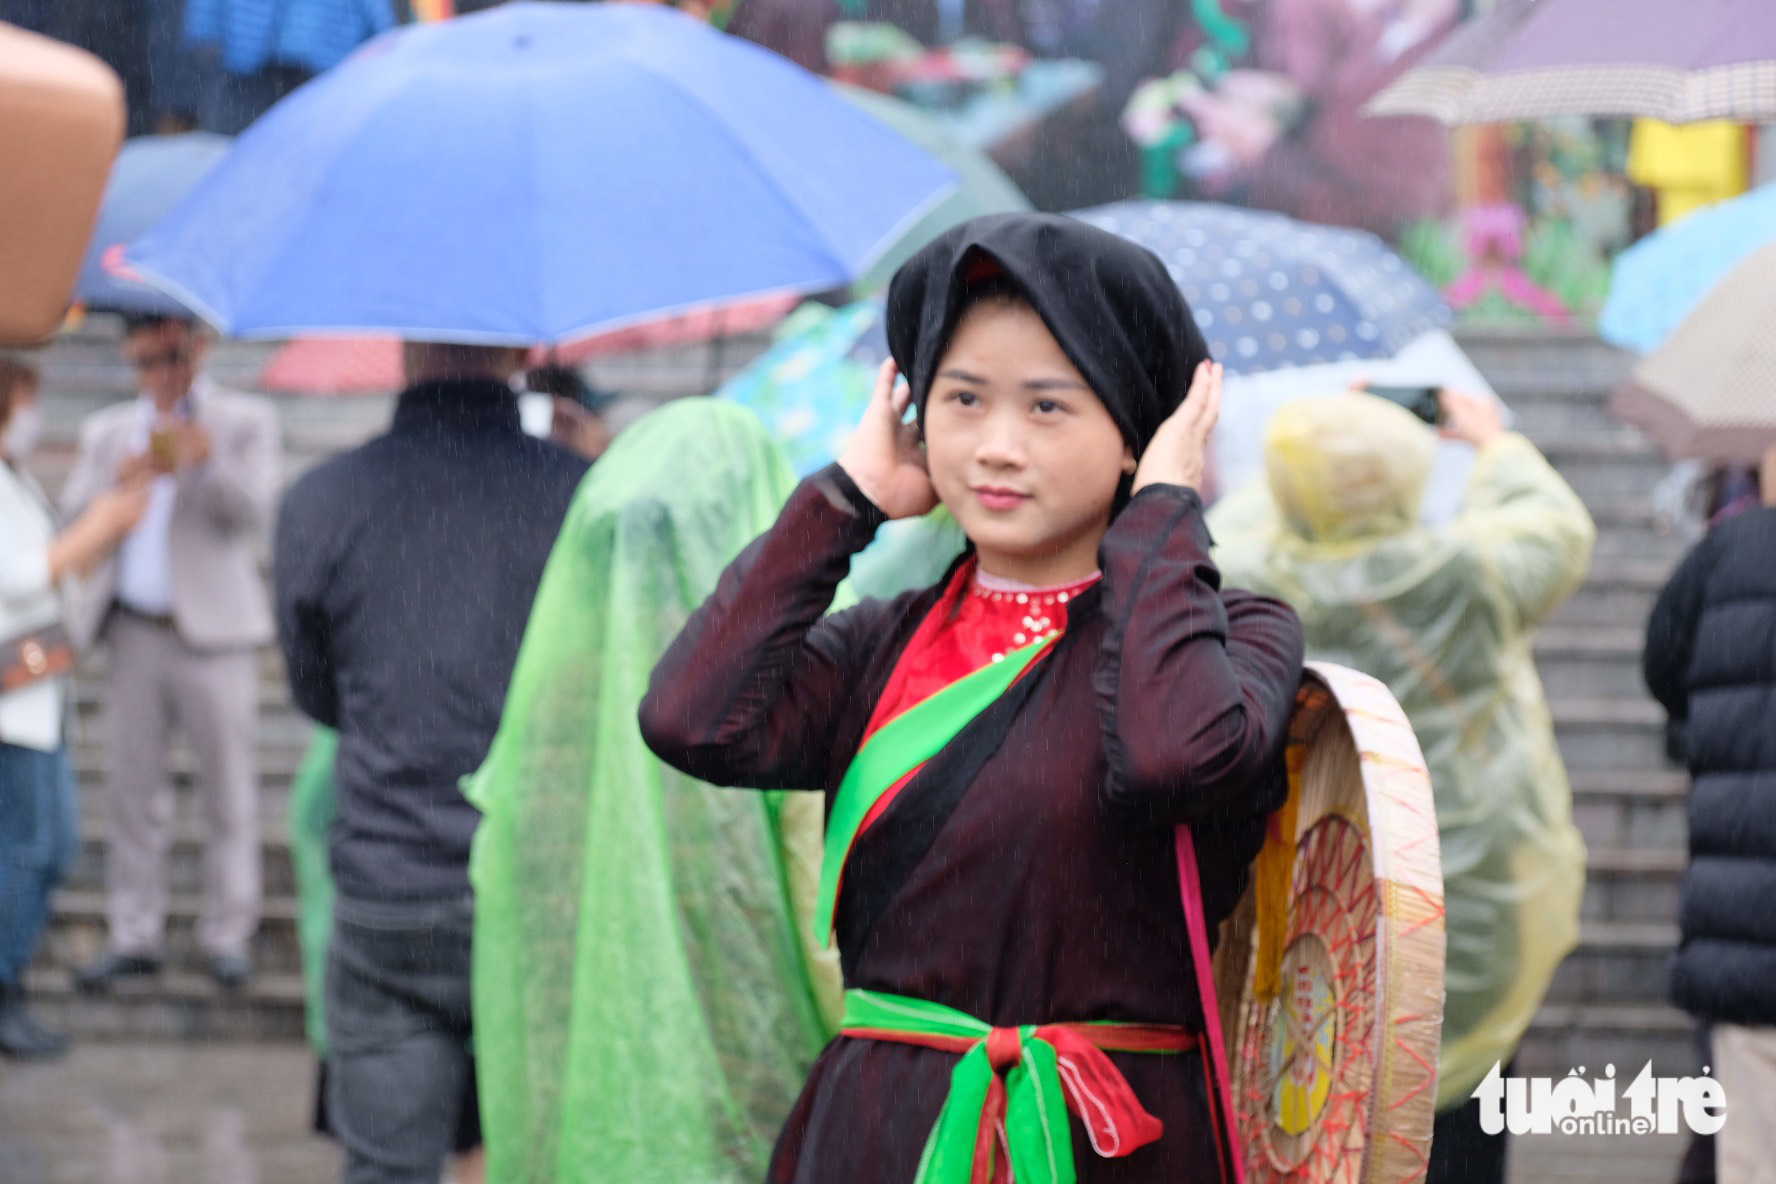 Luong Hong Hanh, who traveled 100km from Lang Son Province, dons a traditional costume at the Lim Festival in Tien Du District, Bac Ninh Province, Vietnam, February 3, 2023. Photo: Nguyen Bao / Tuoi Tre